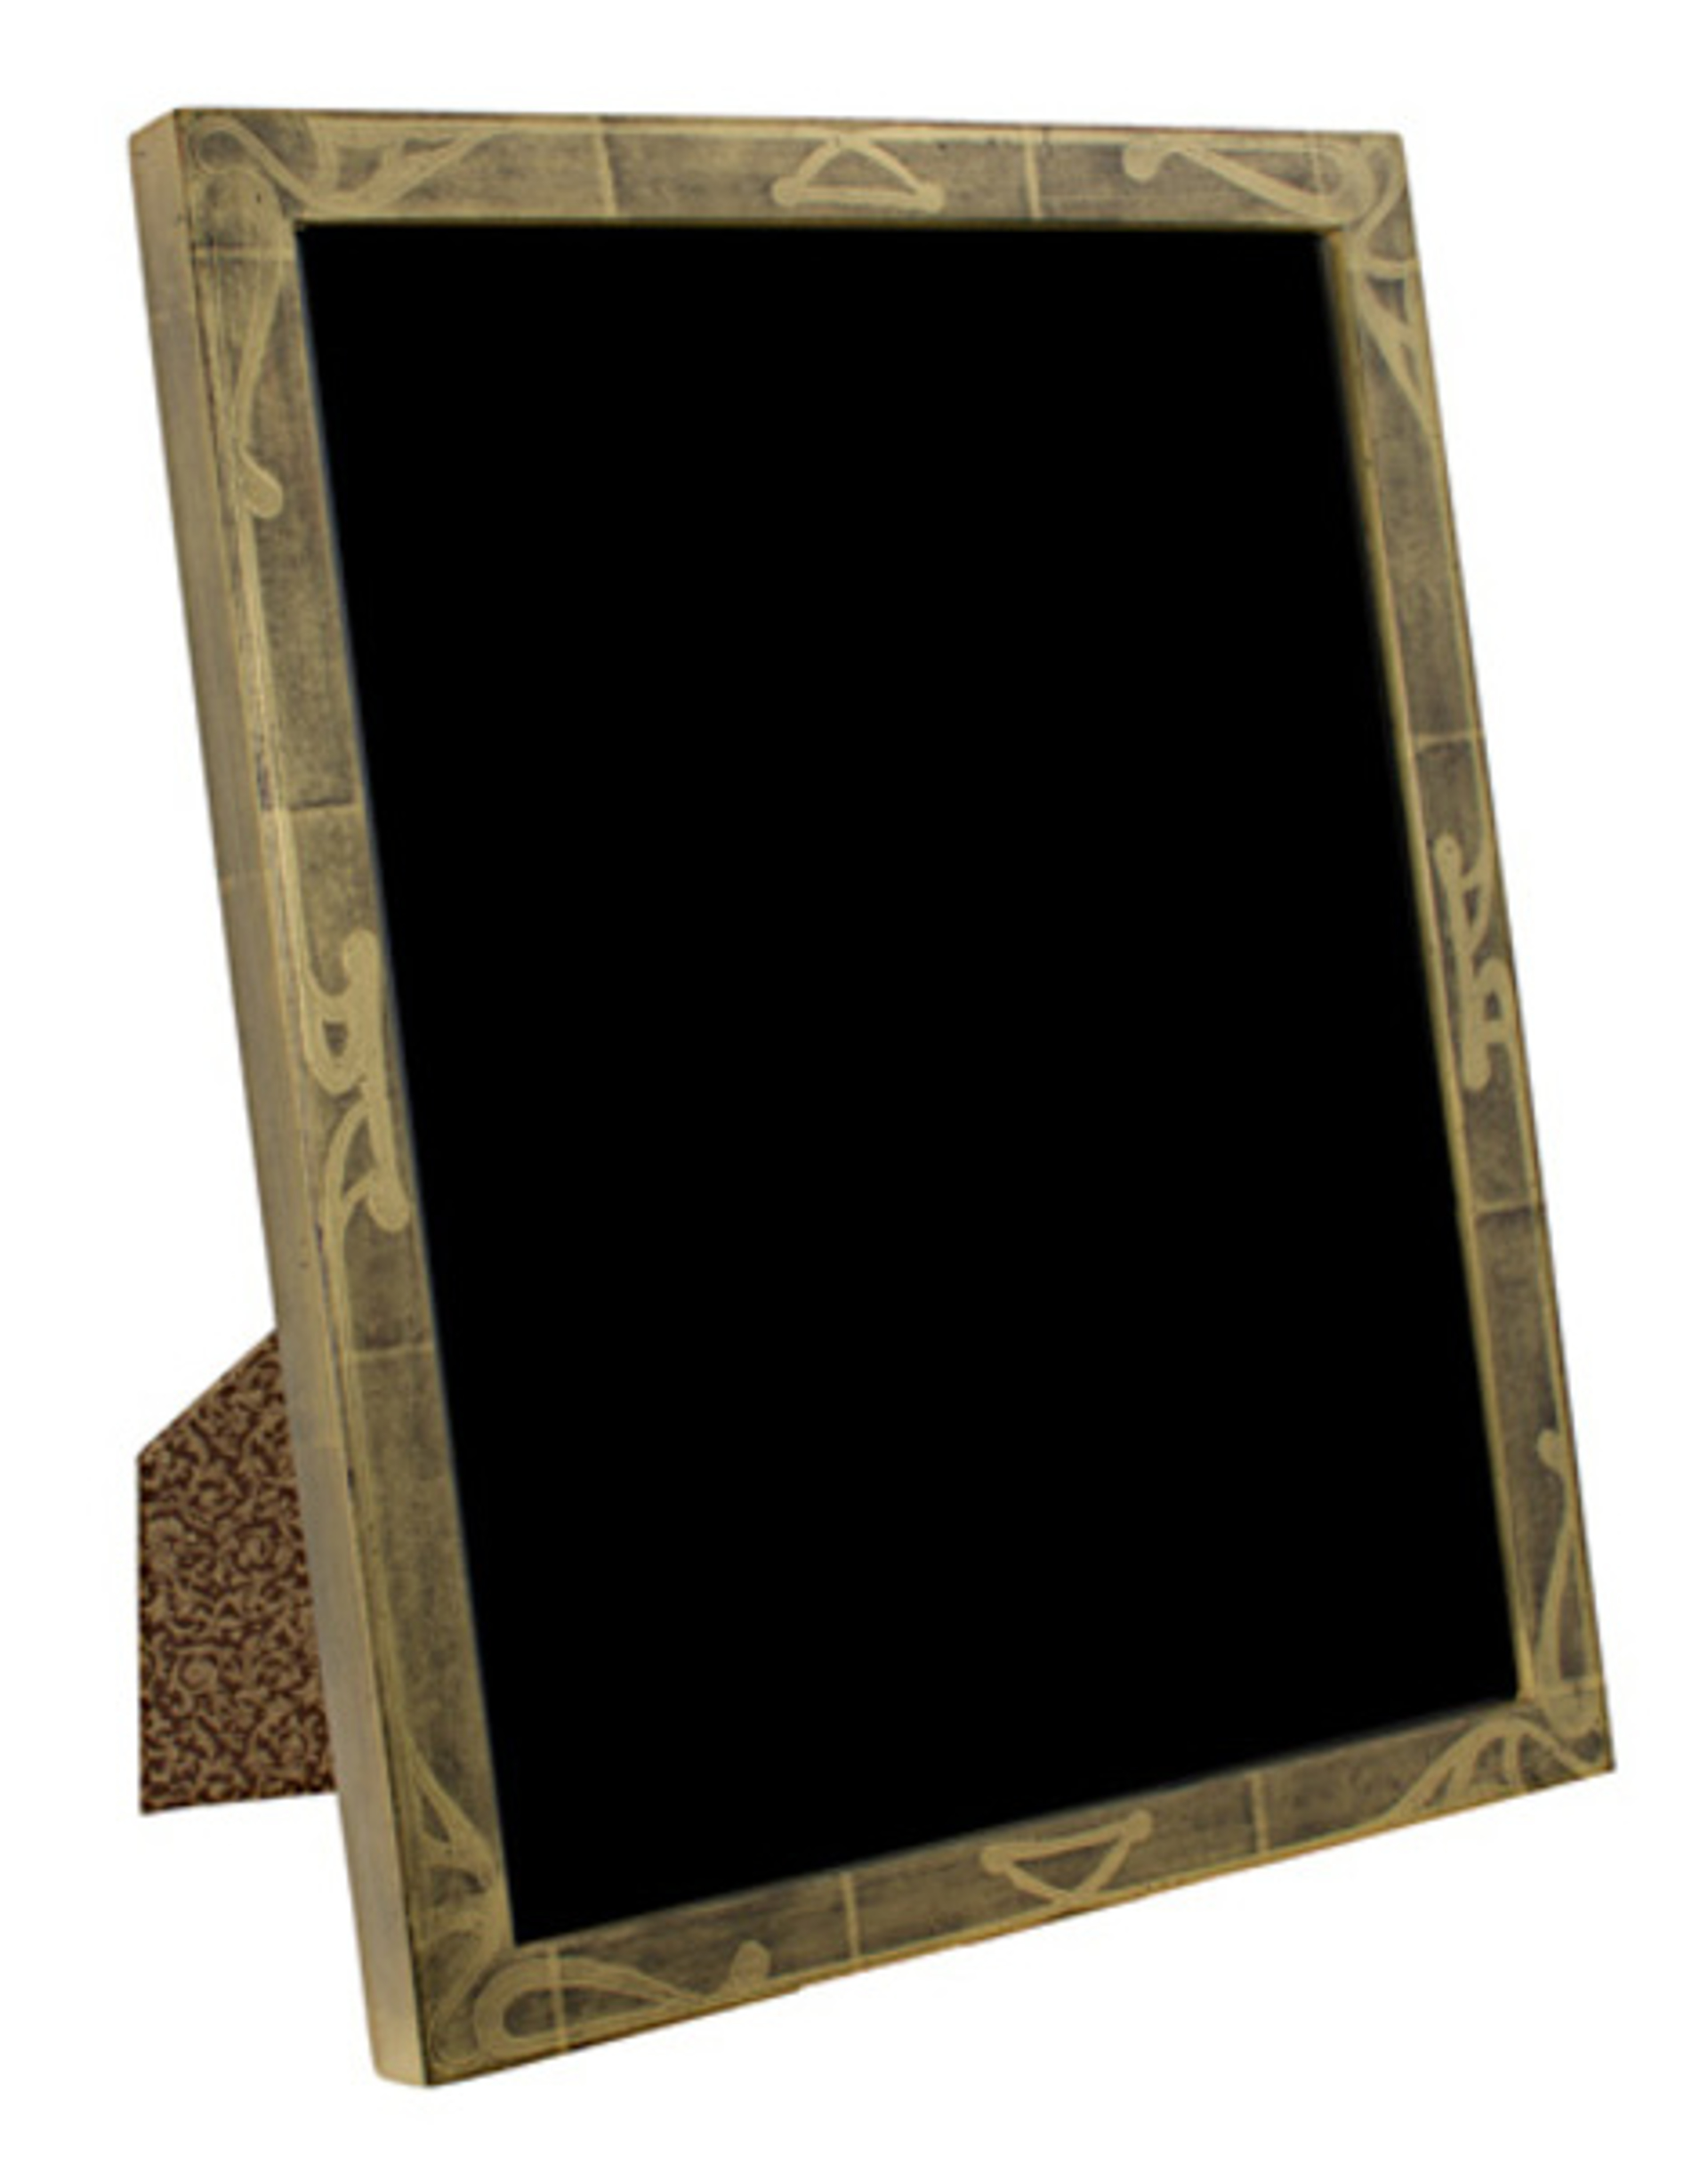 22K GOLD LEAF HANDMADE PHOTO FRAME 8X10 (Vertical -or- Horizontal) by Romanian